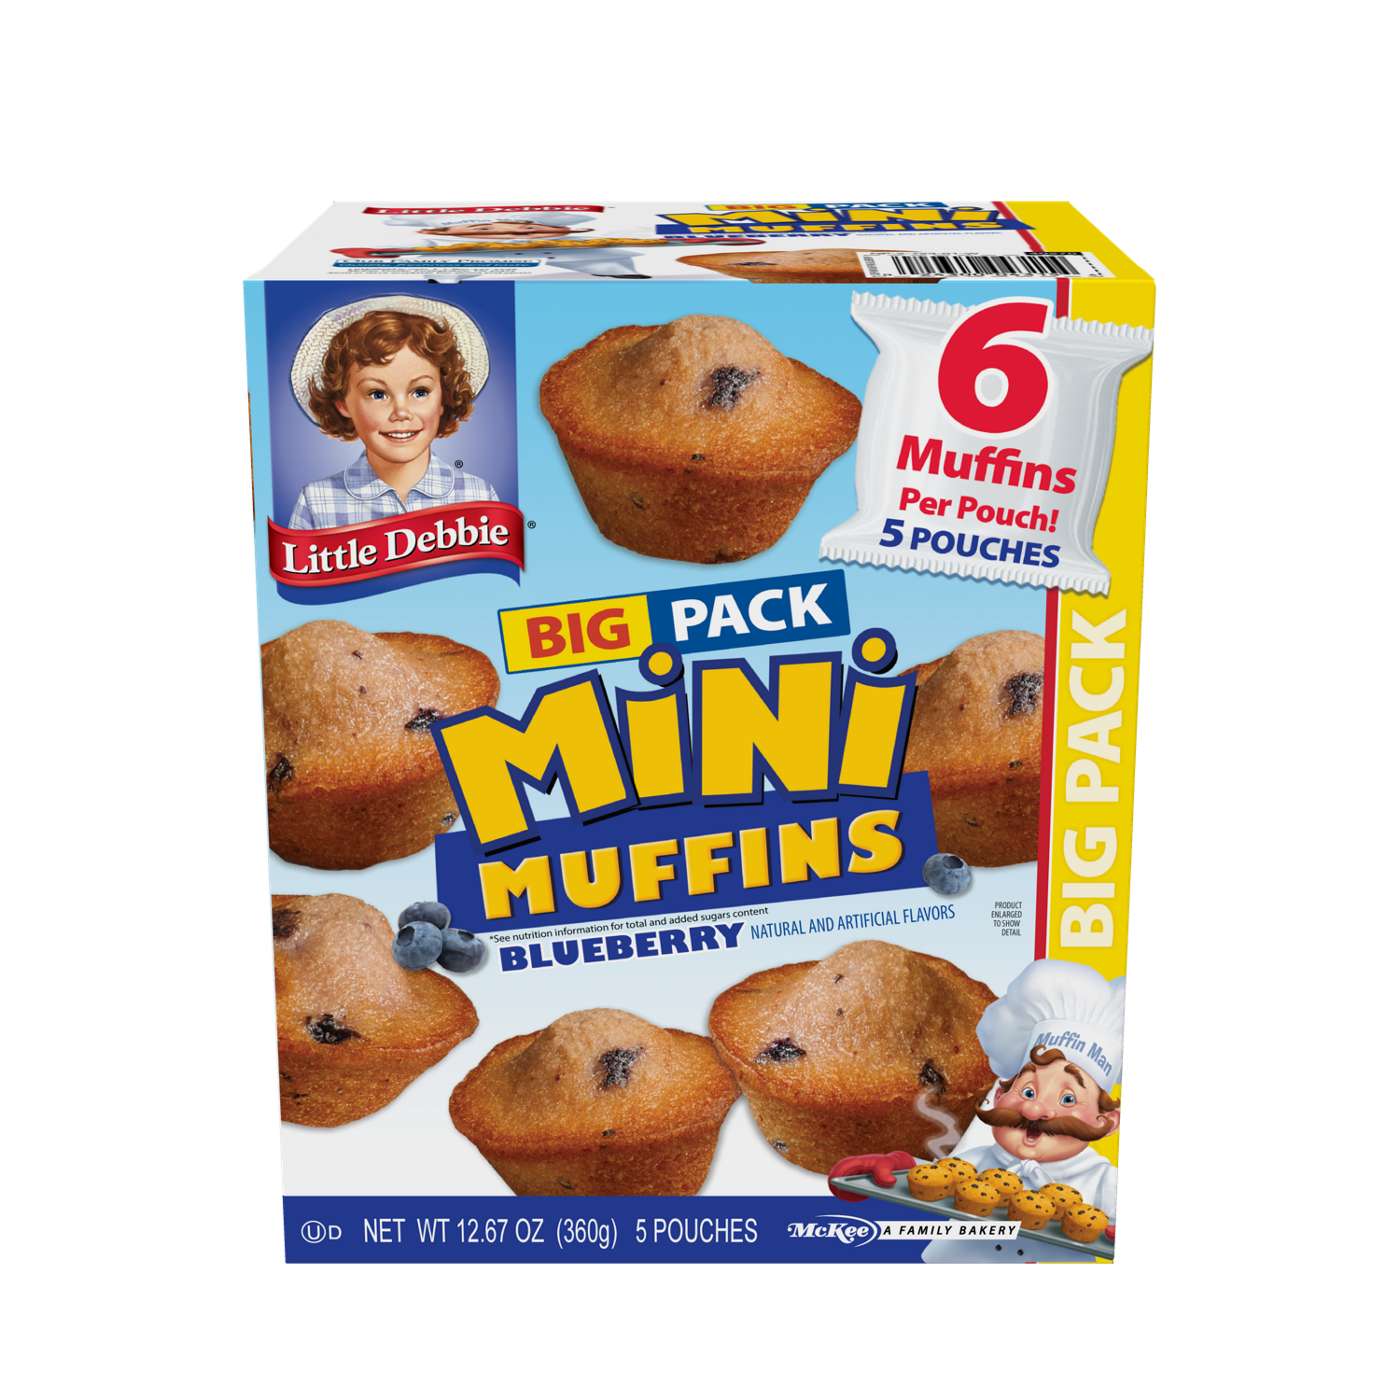 LITTLE DEBBIE Blueberry Mini Muffins Big Pack; image 2 of 3